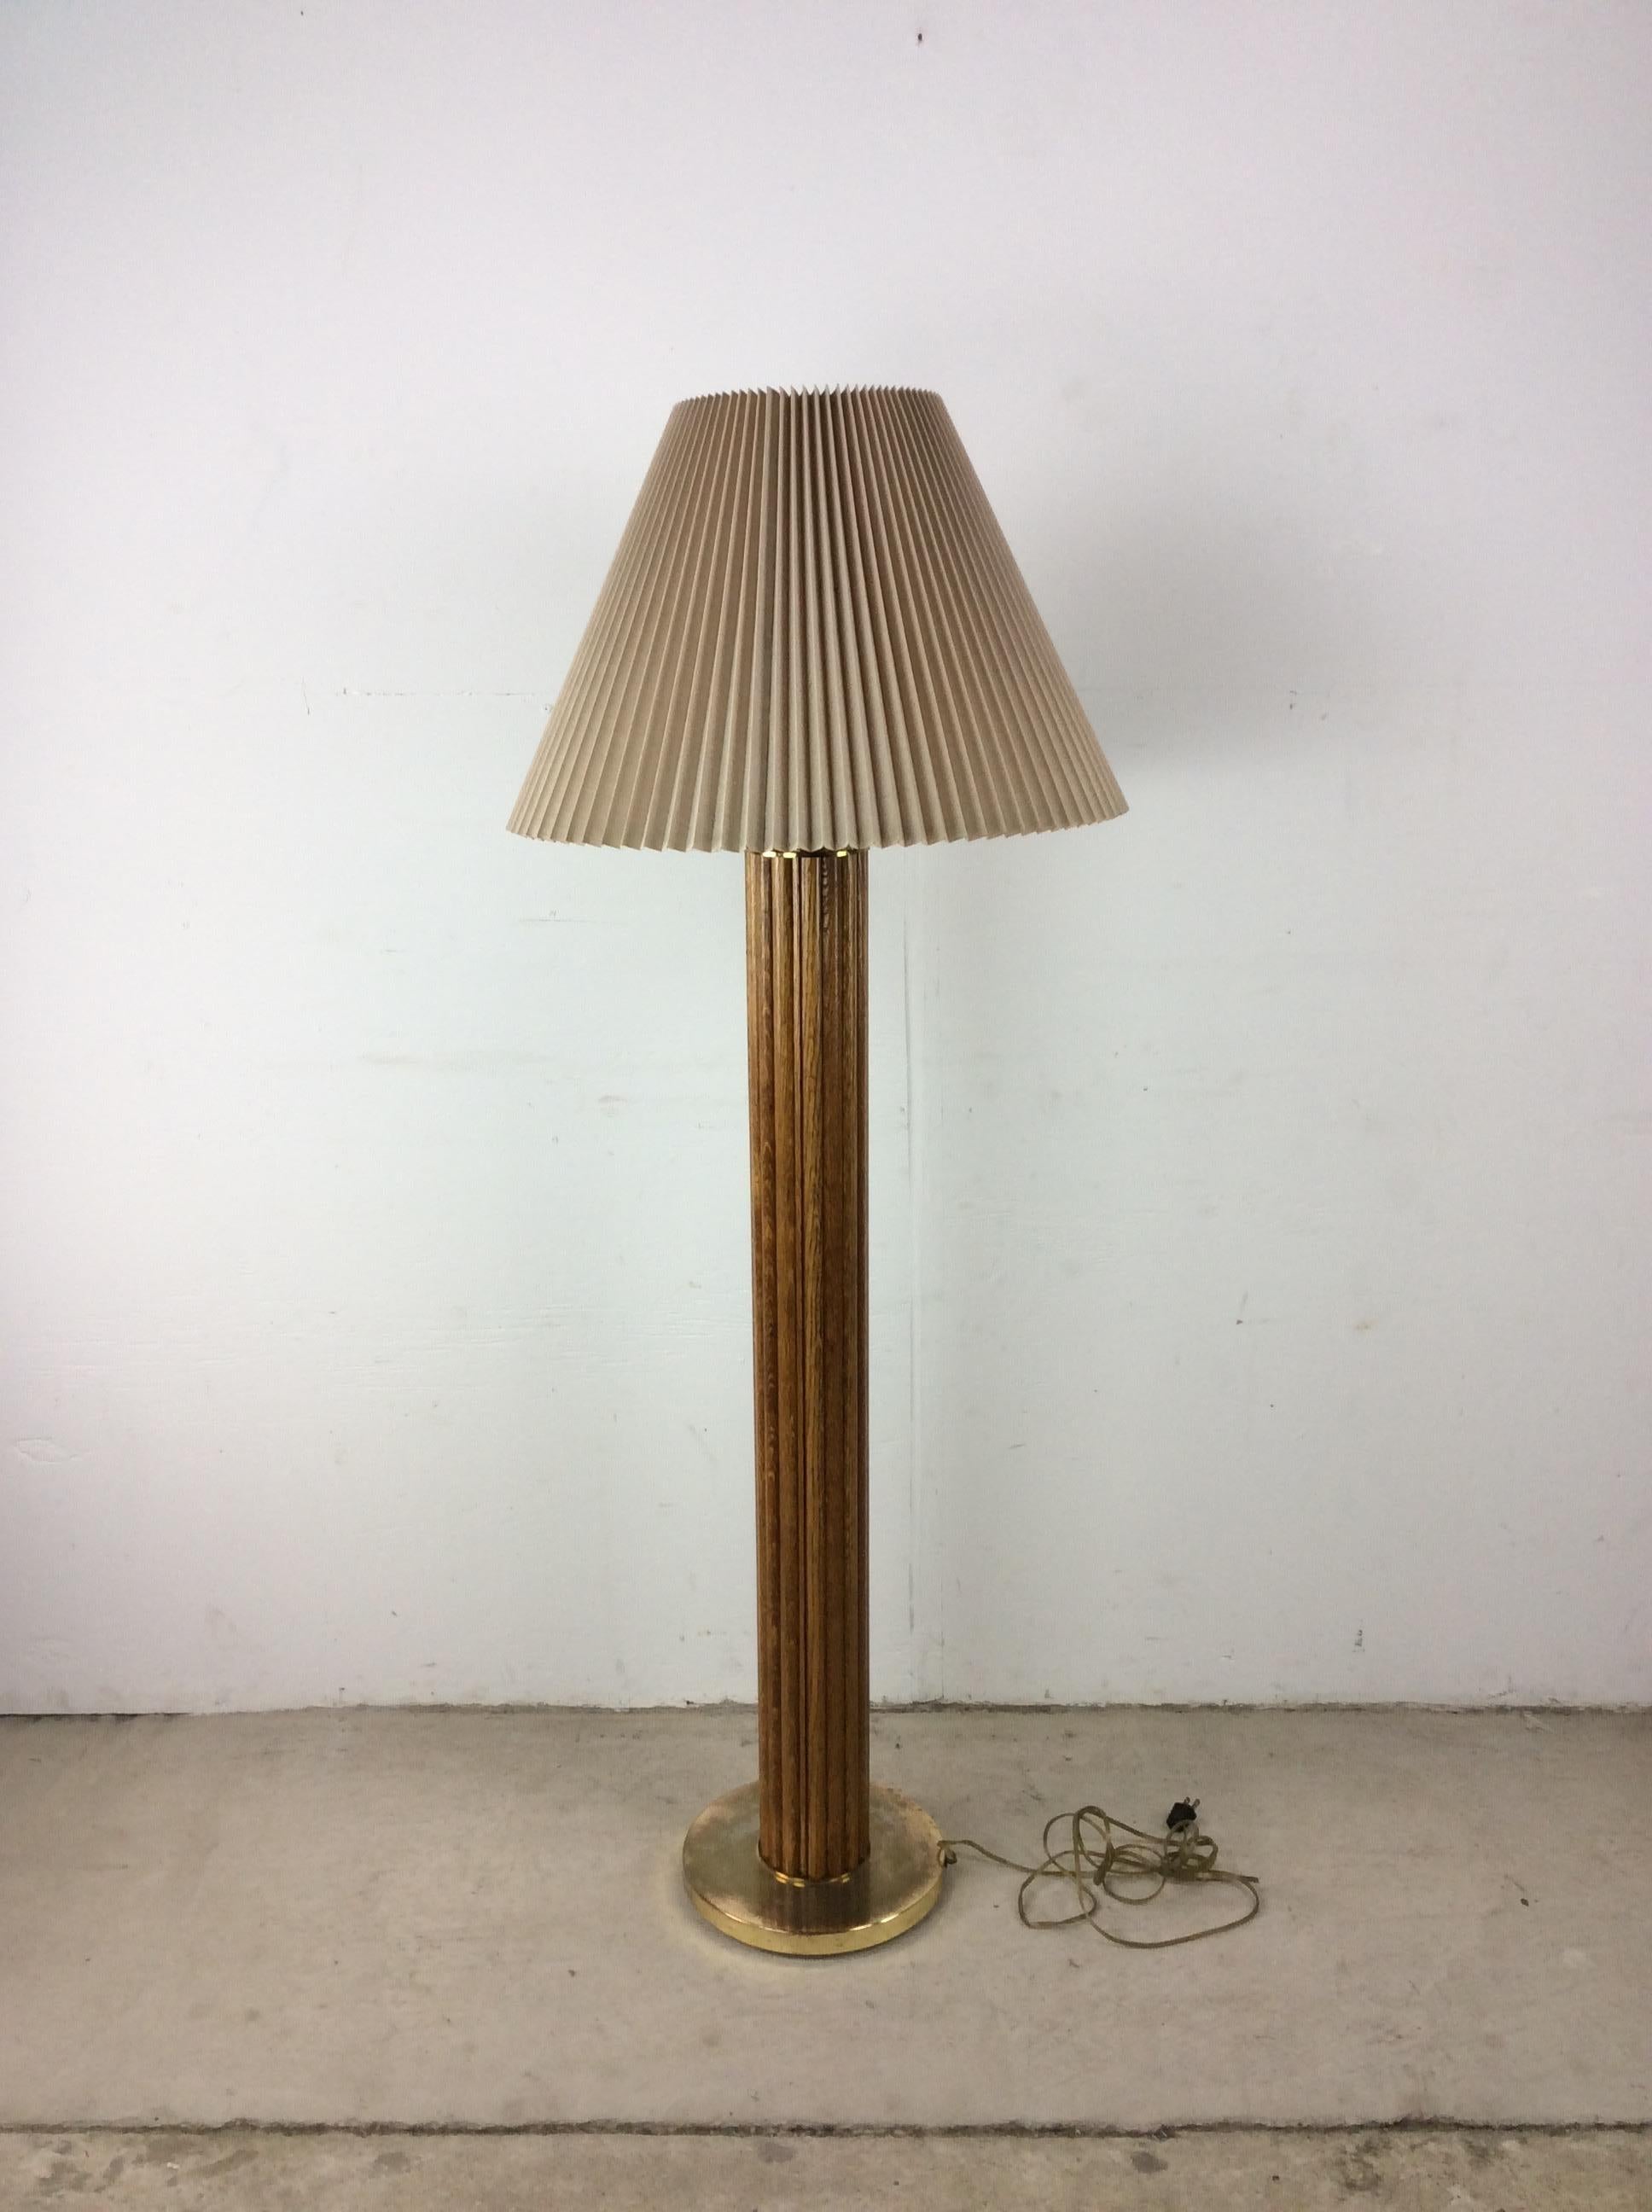 Vintage Boho Chic Rattan Floor Lamp with Pleated Shade For Sale 6